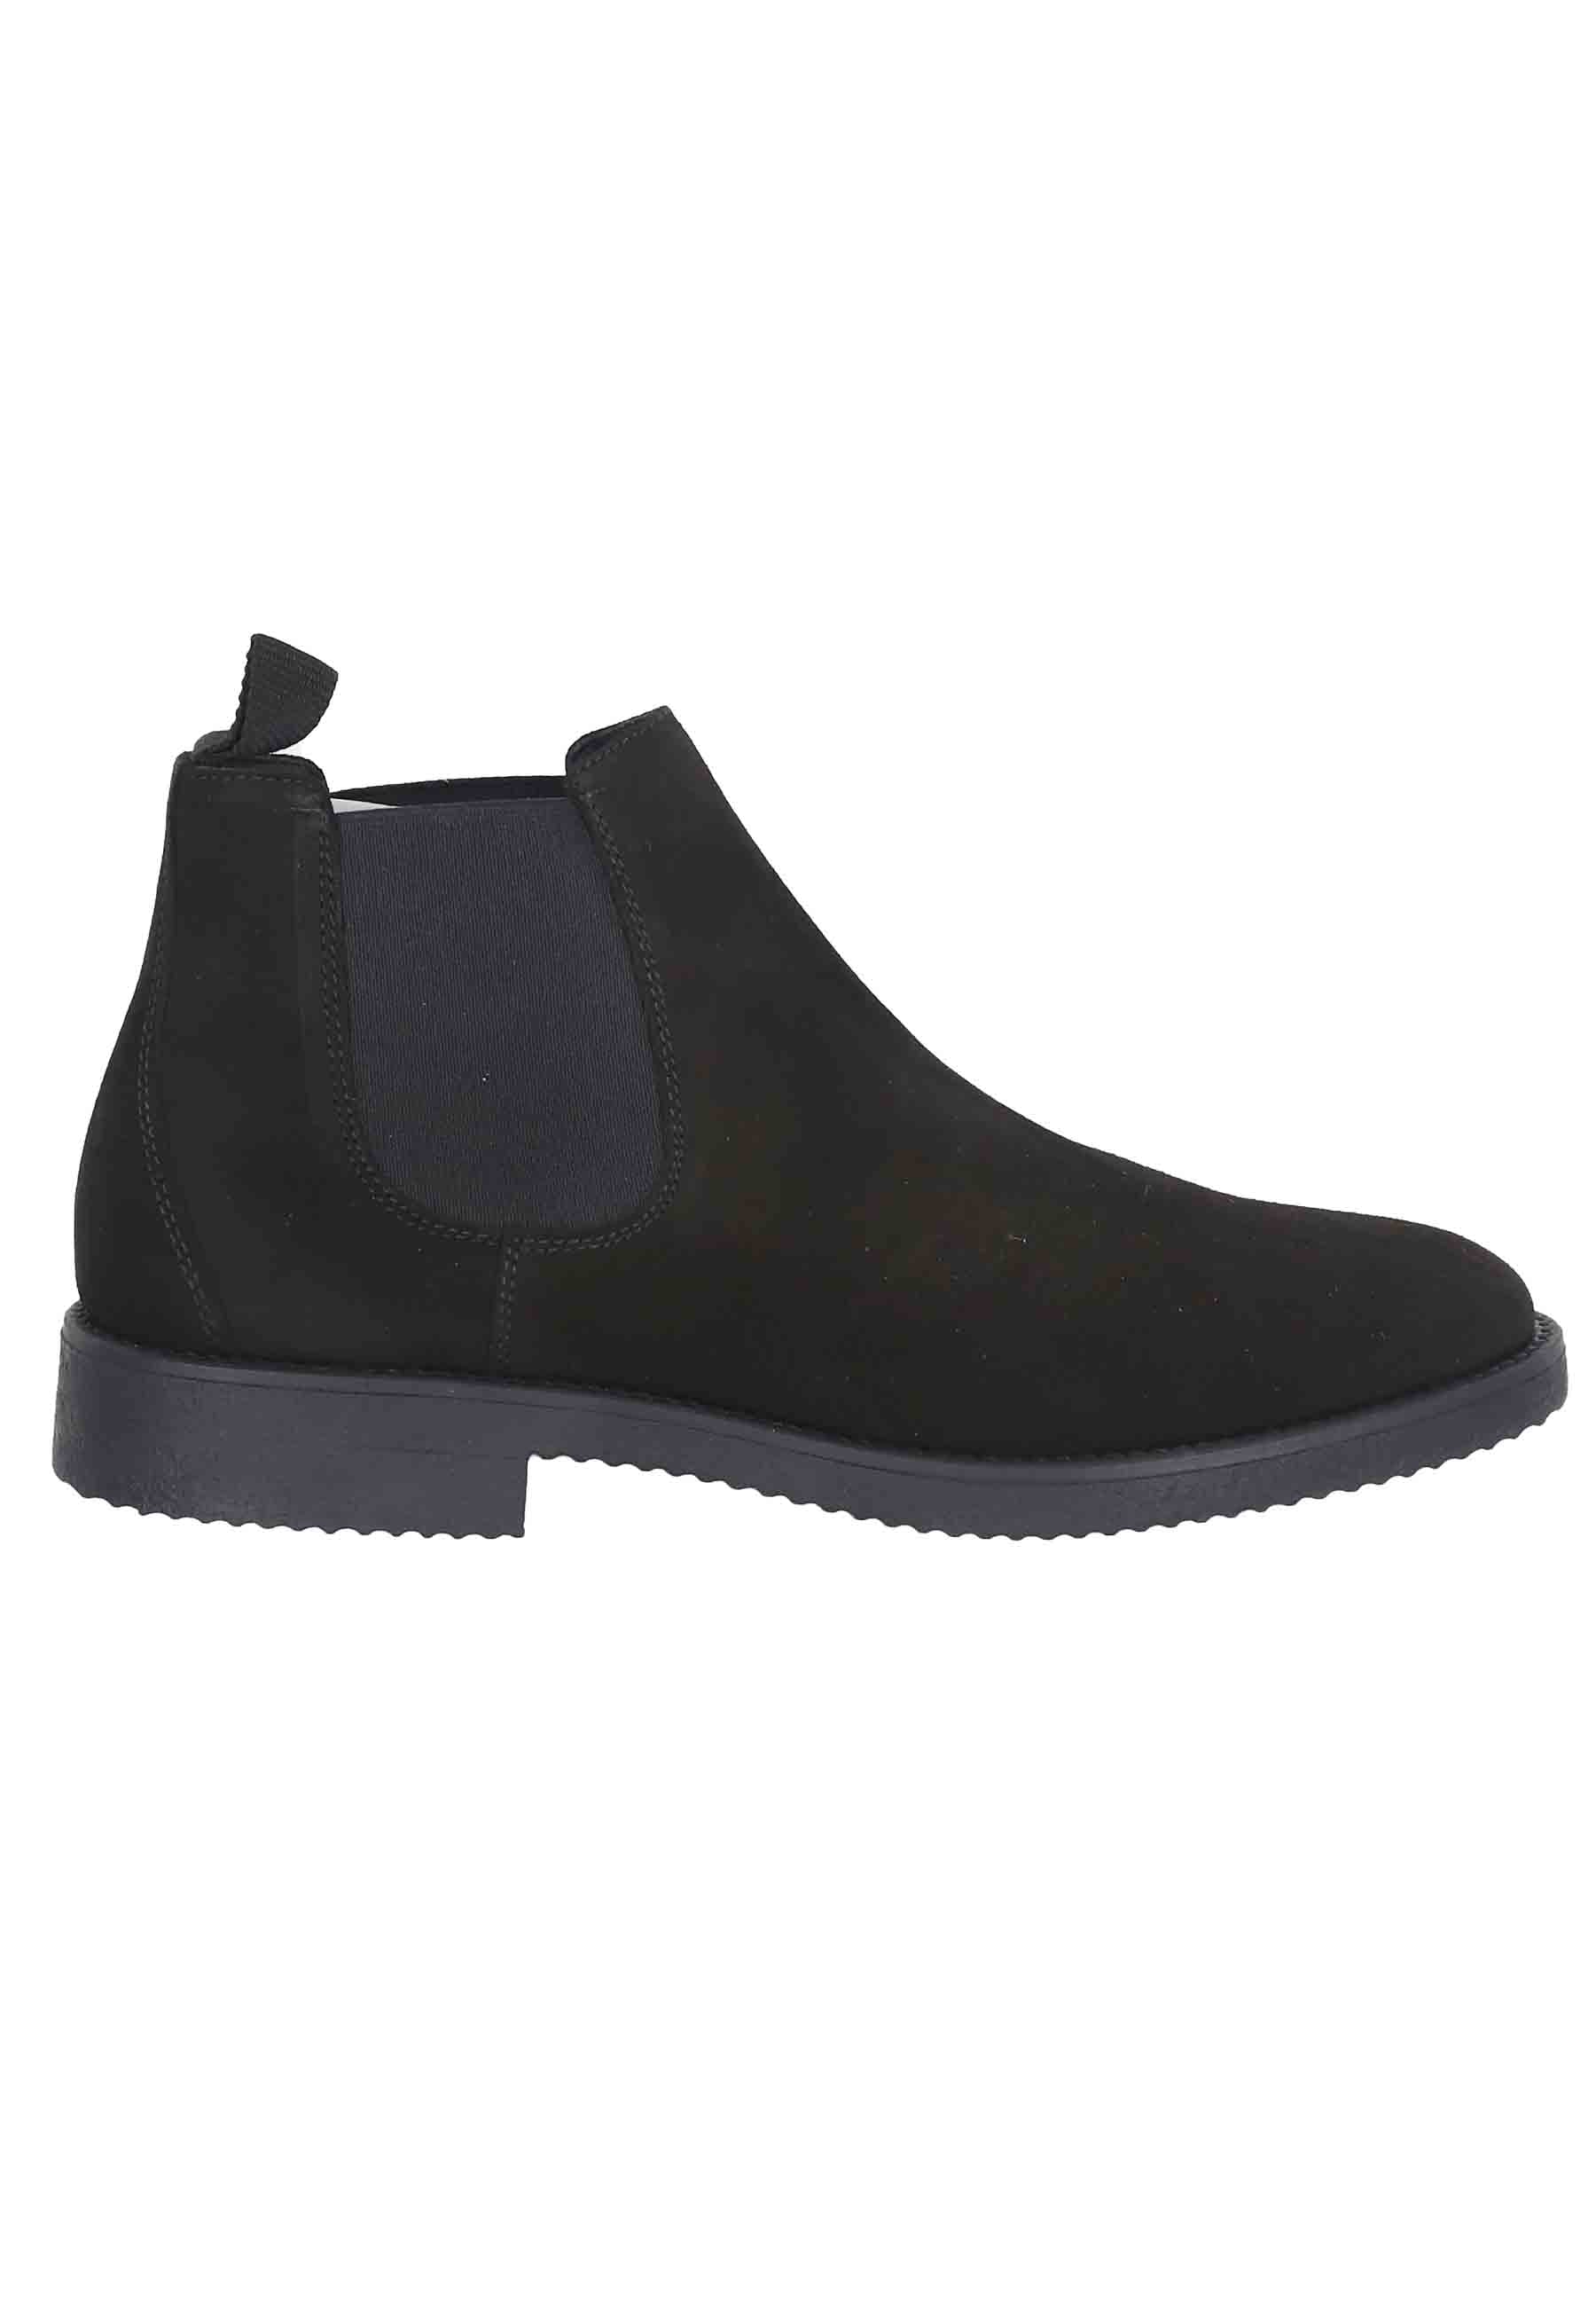 Men's Chelsea boots in black suede with crepe sole